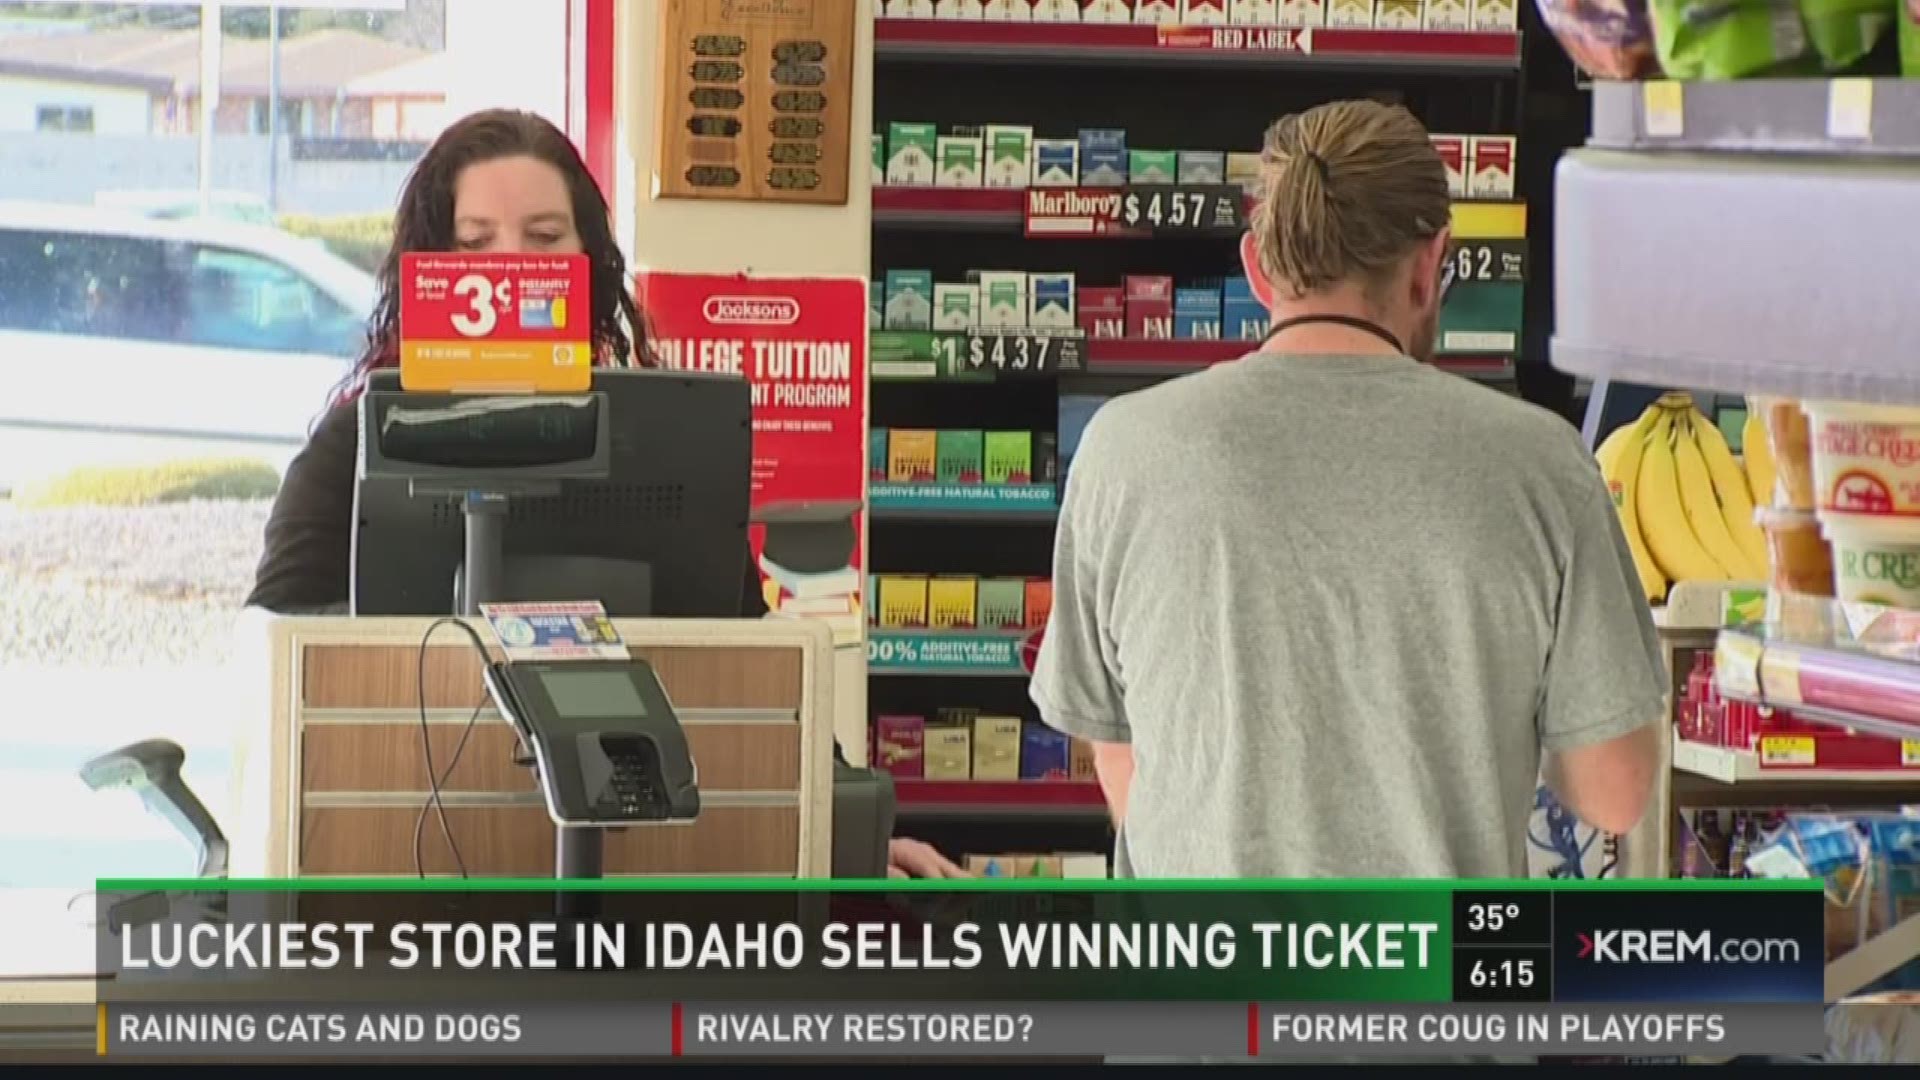 A Boise convenience store is considered by some to be the luckiest in Idaho - at least when it comes to lottery tickets.